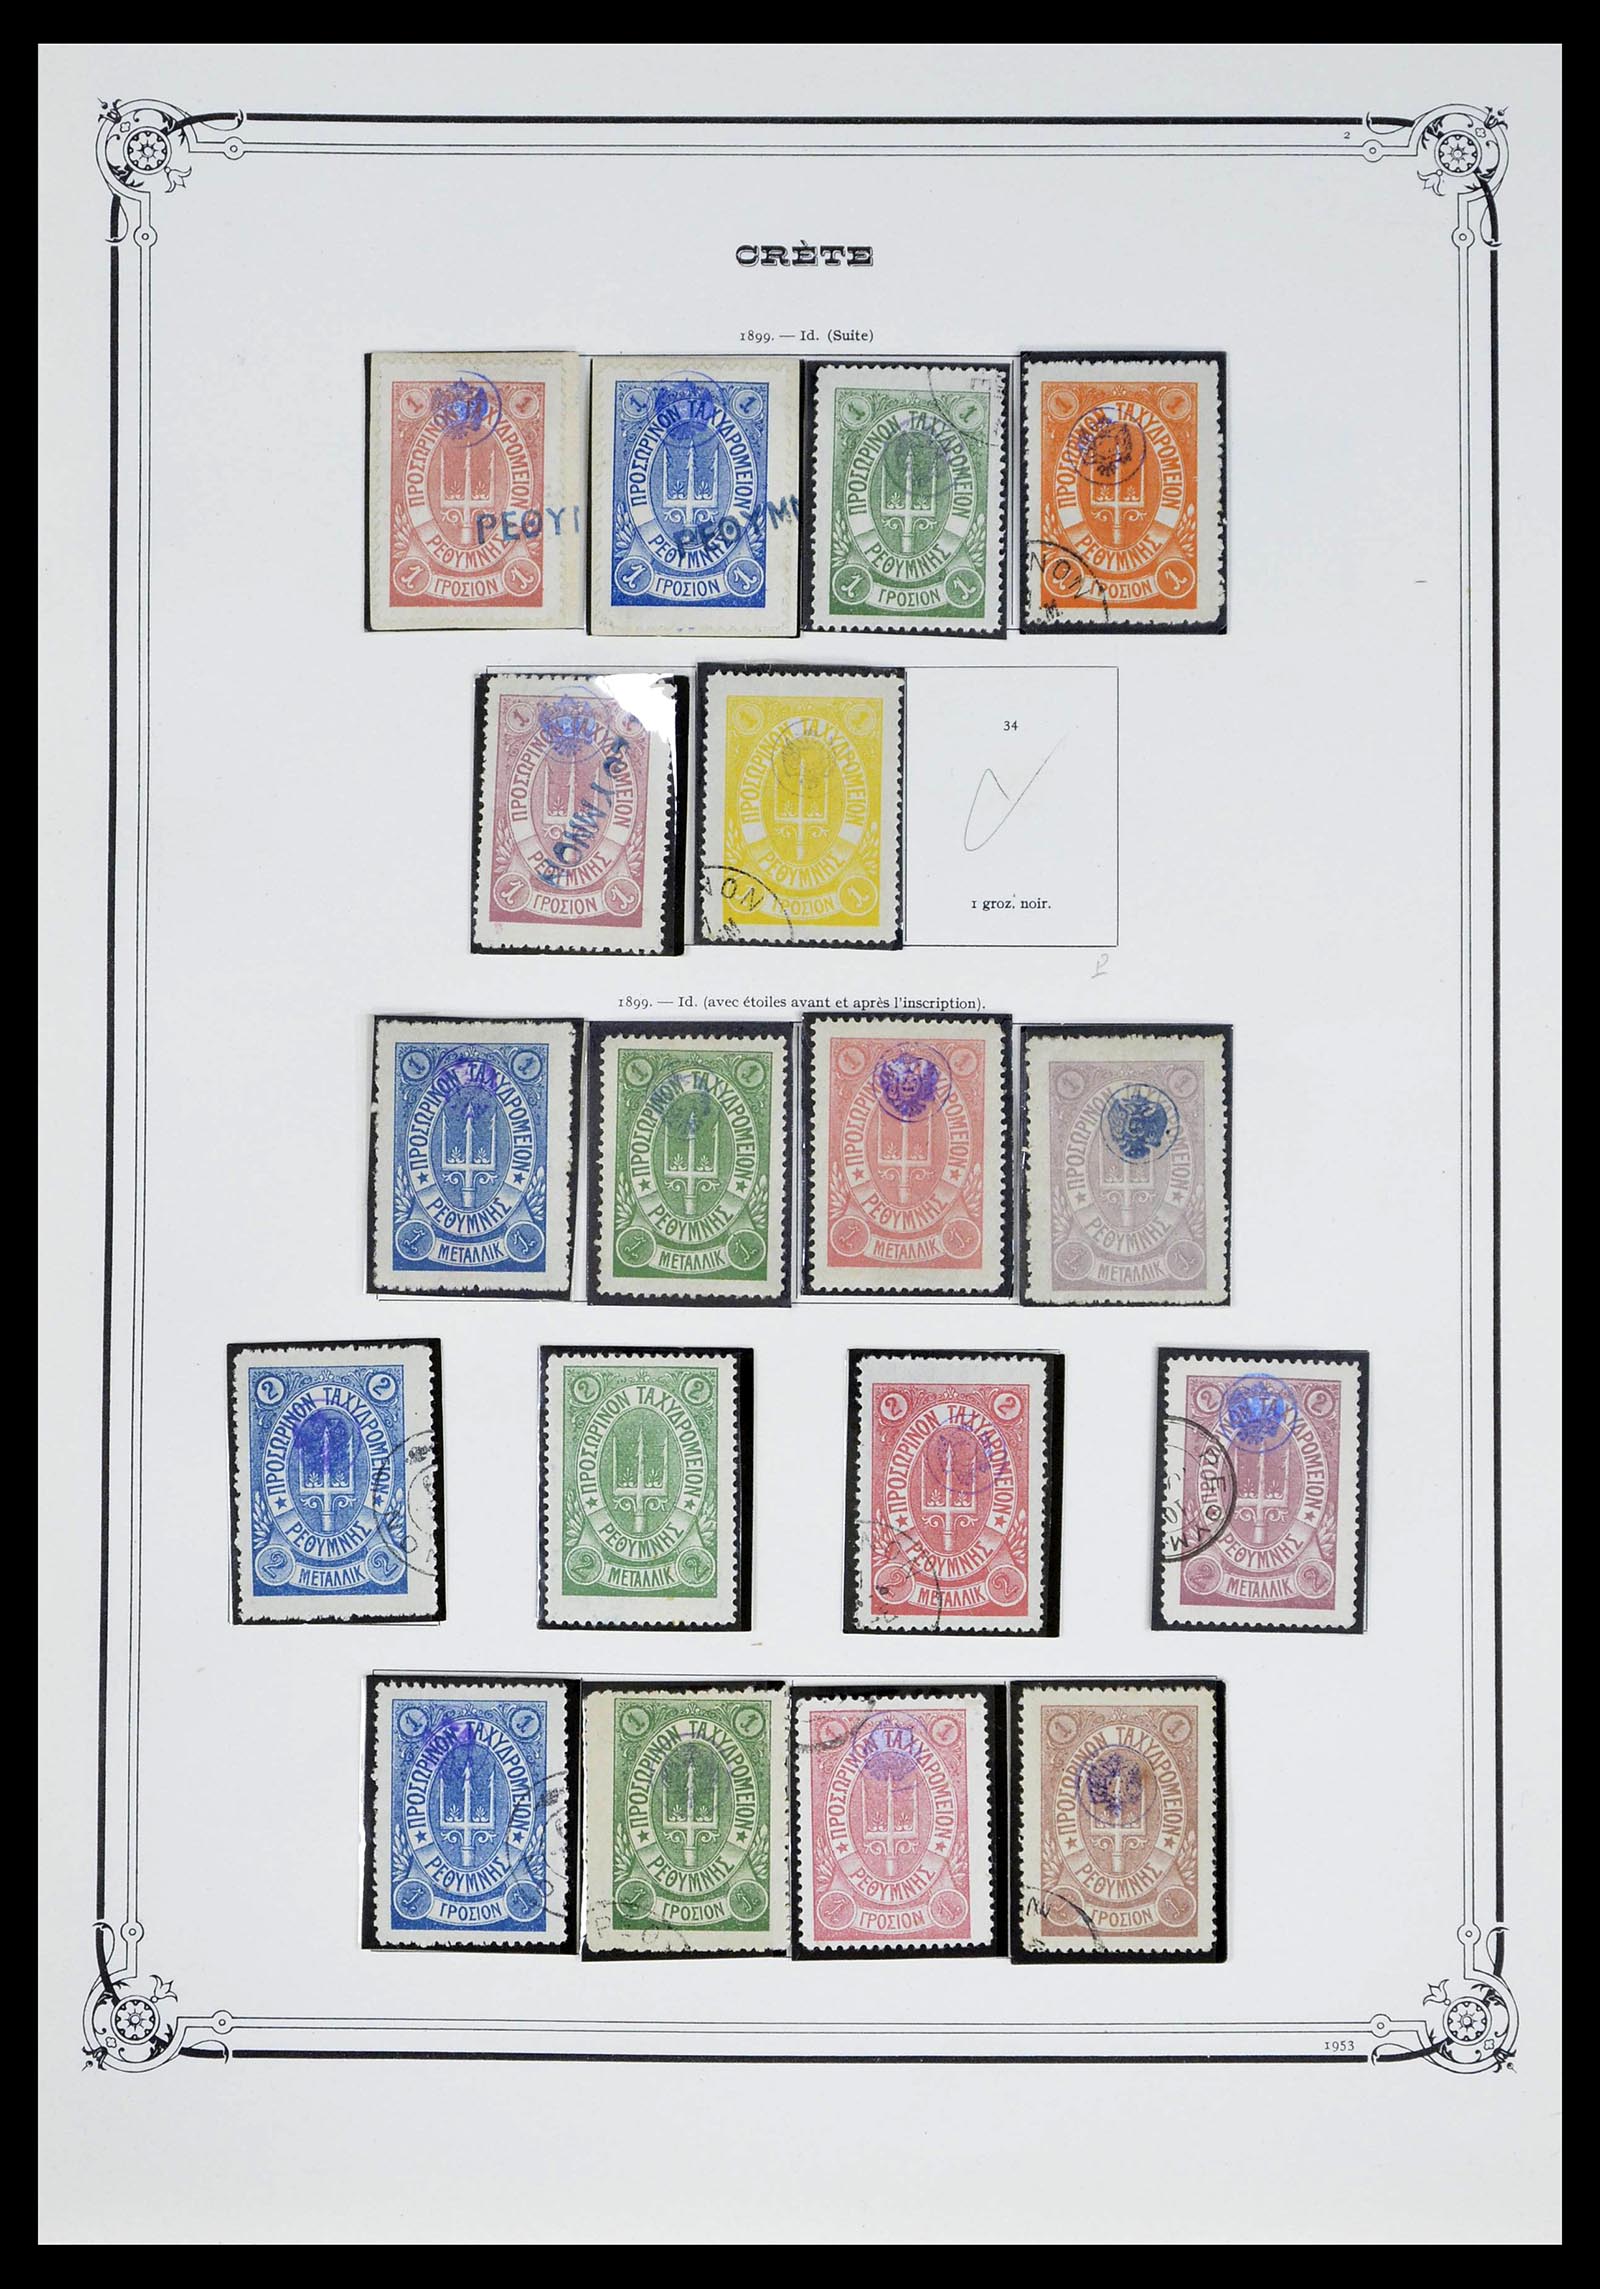 39285 0002 - Stamp collection 39285 Crete 1898-1914.